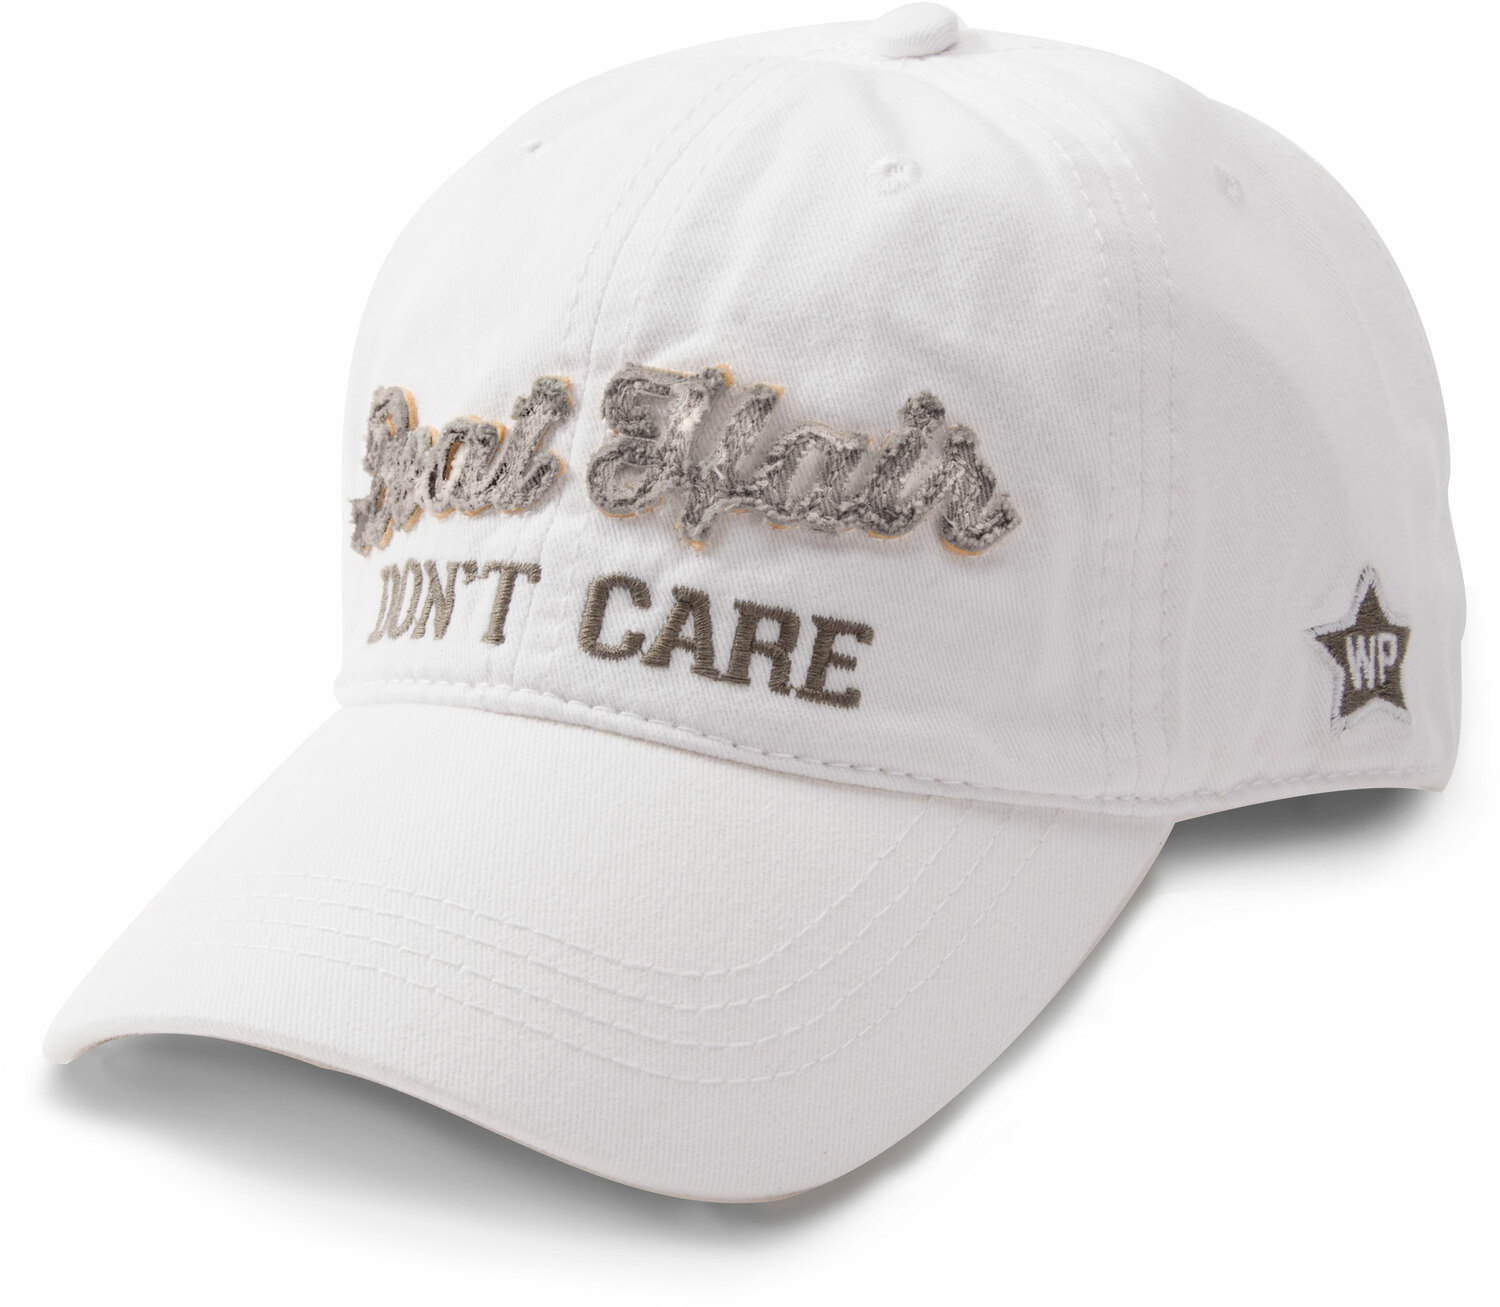 Boat Hair by We People - Boat Hair - White Adjustable Hat